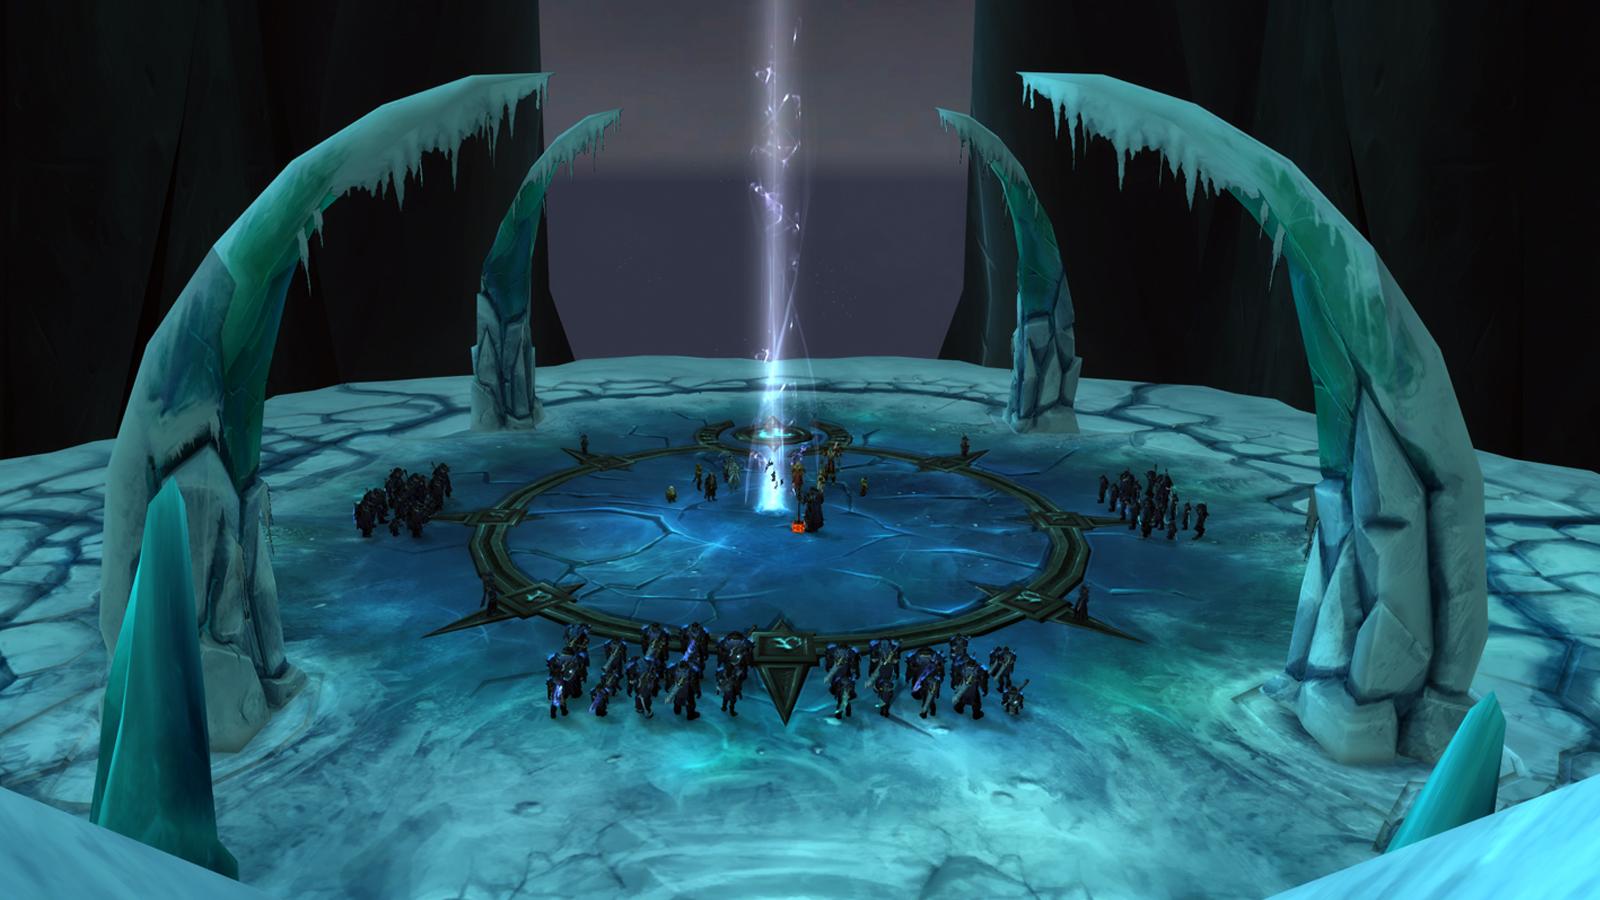 The Frozen Throne in Wrath of the Lich King/Shadowlands